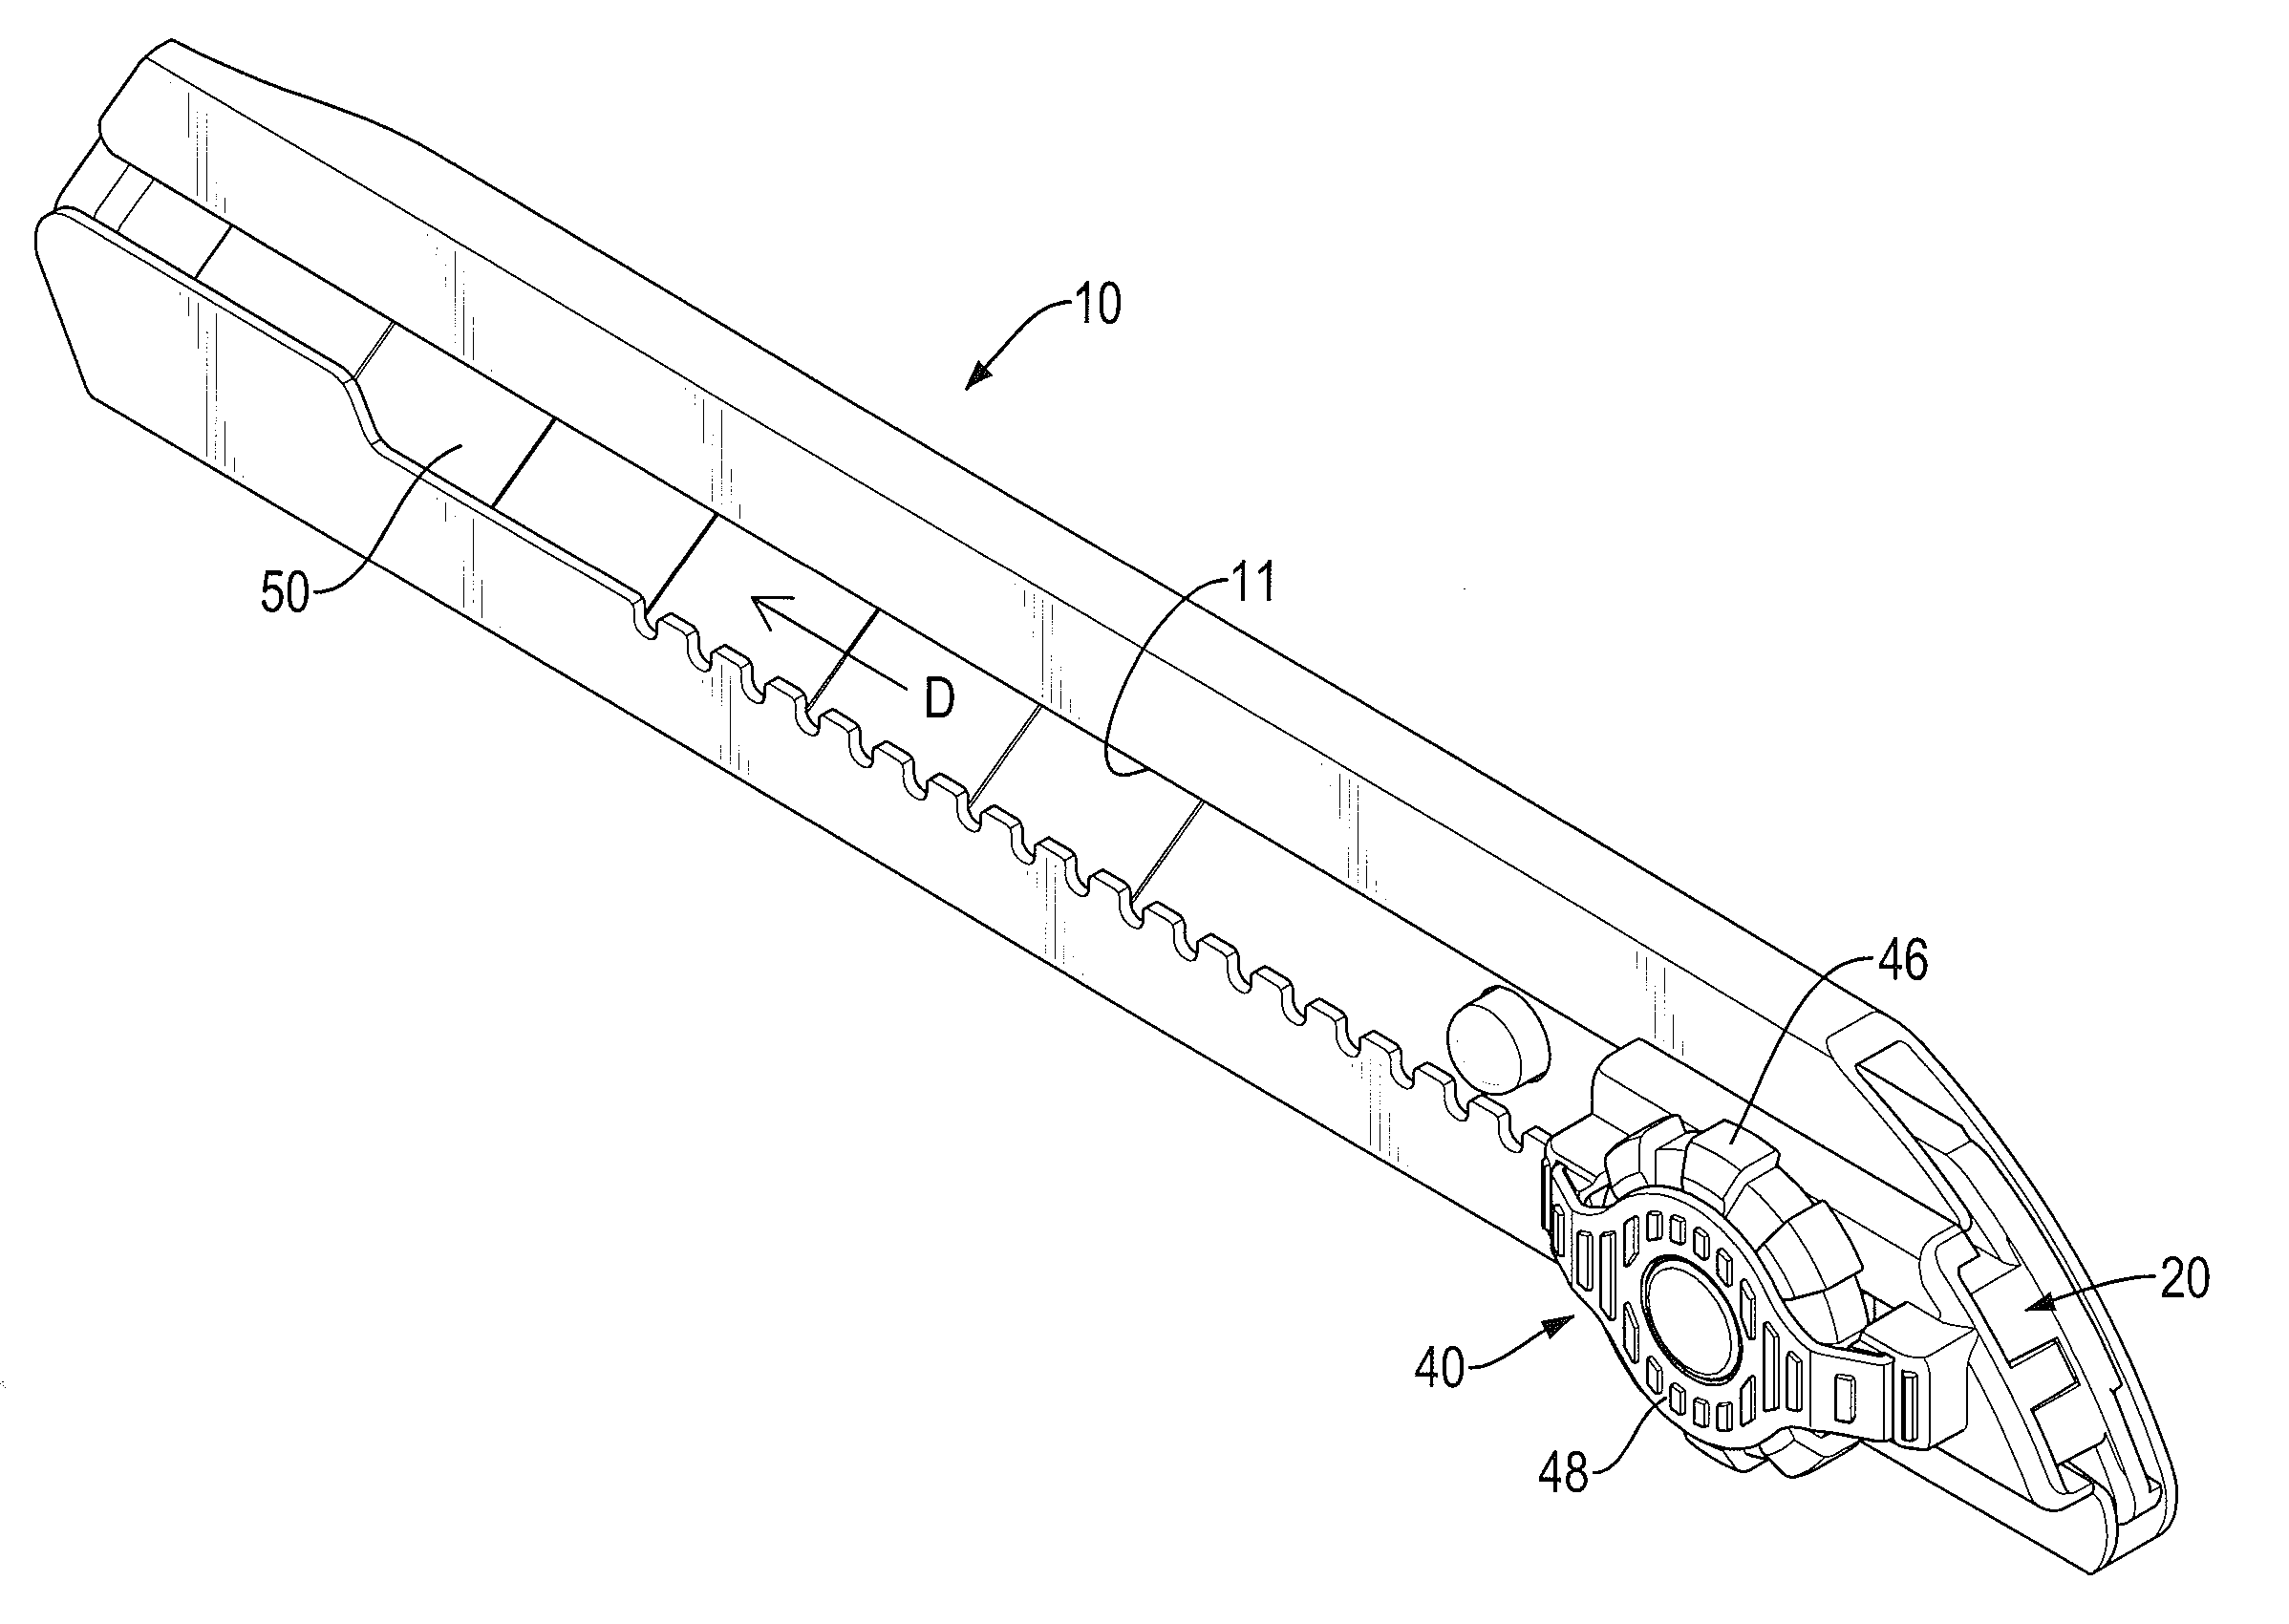 Cutter Assembly Having a Screw-Locking Device